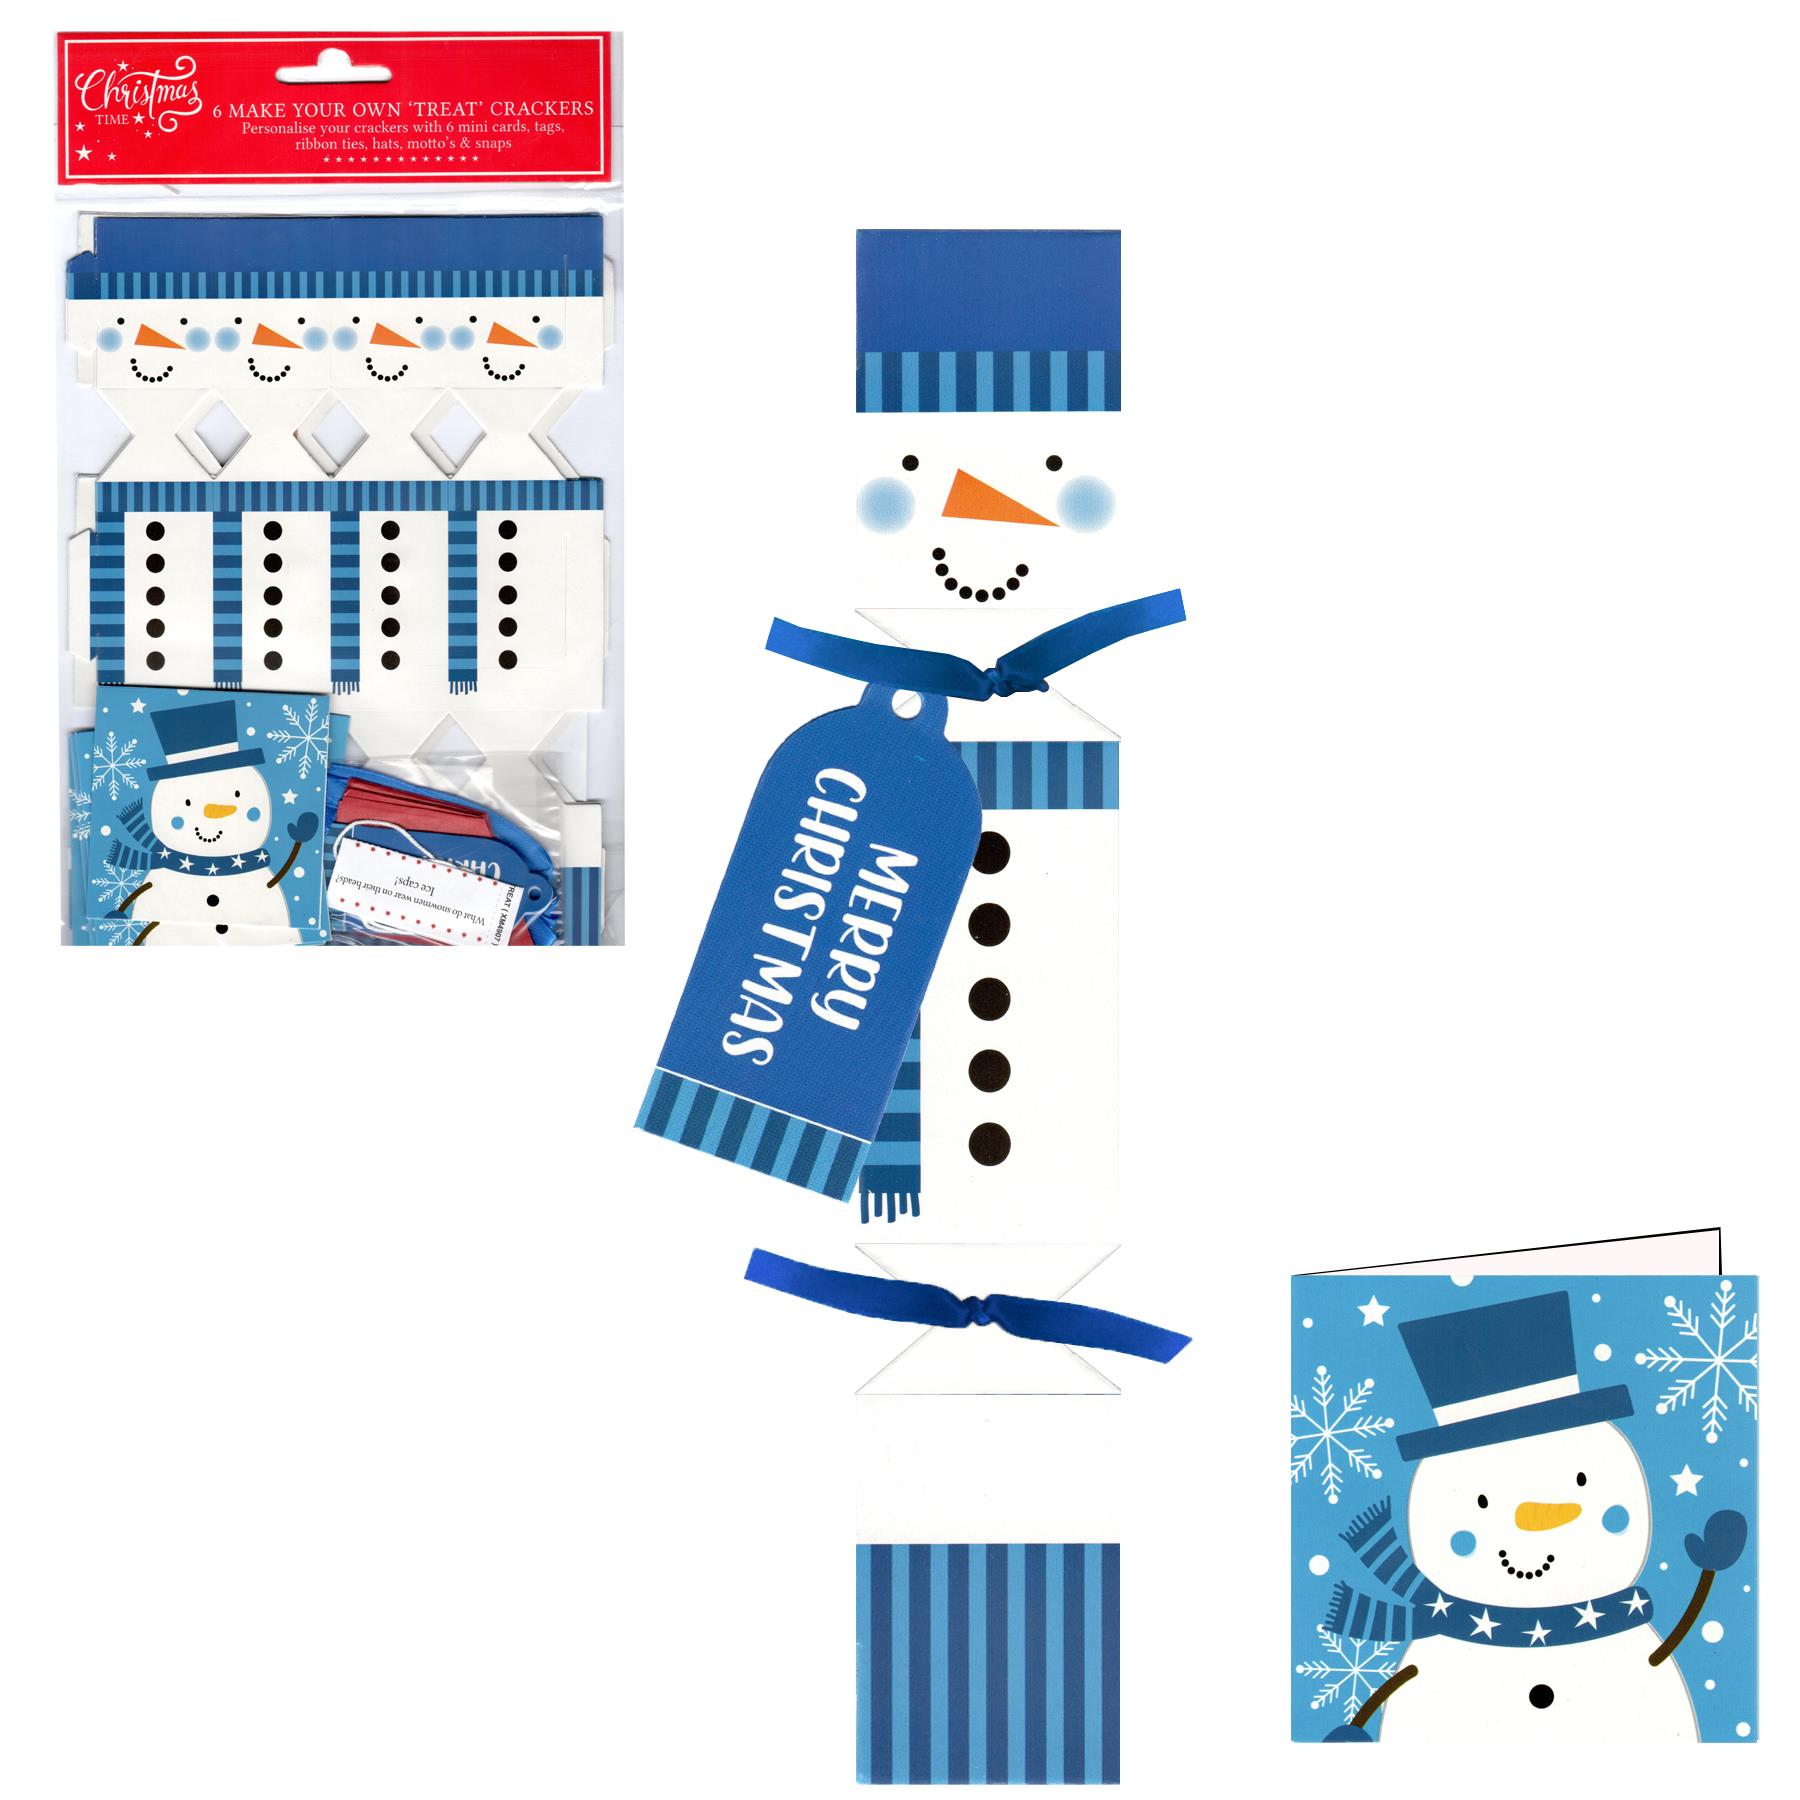 6 Pack Make your Own Treat Christmas Cracker Kit and Cards - Snowman Design